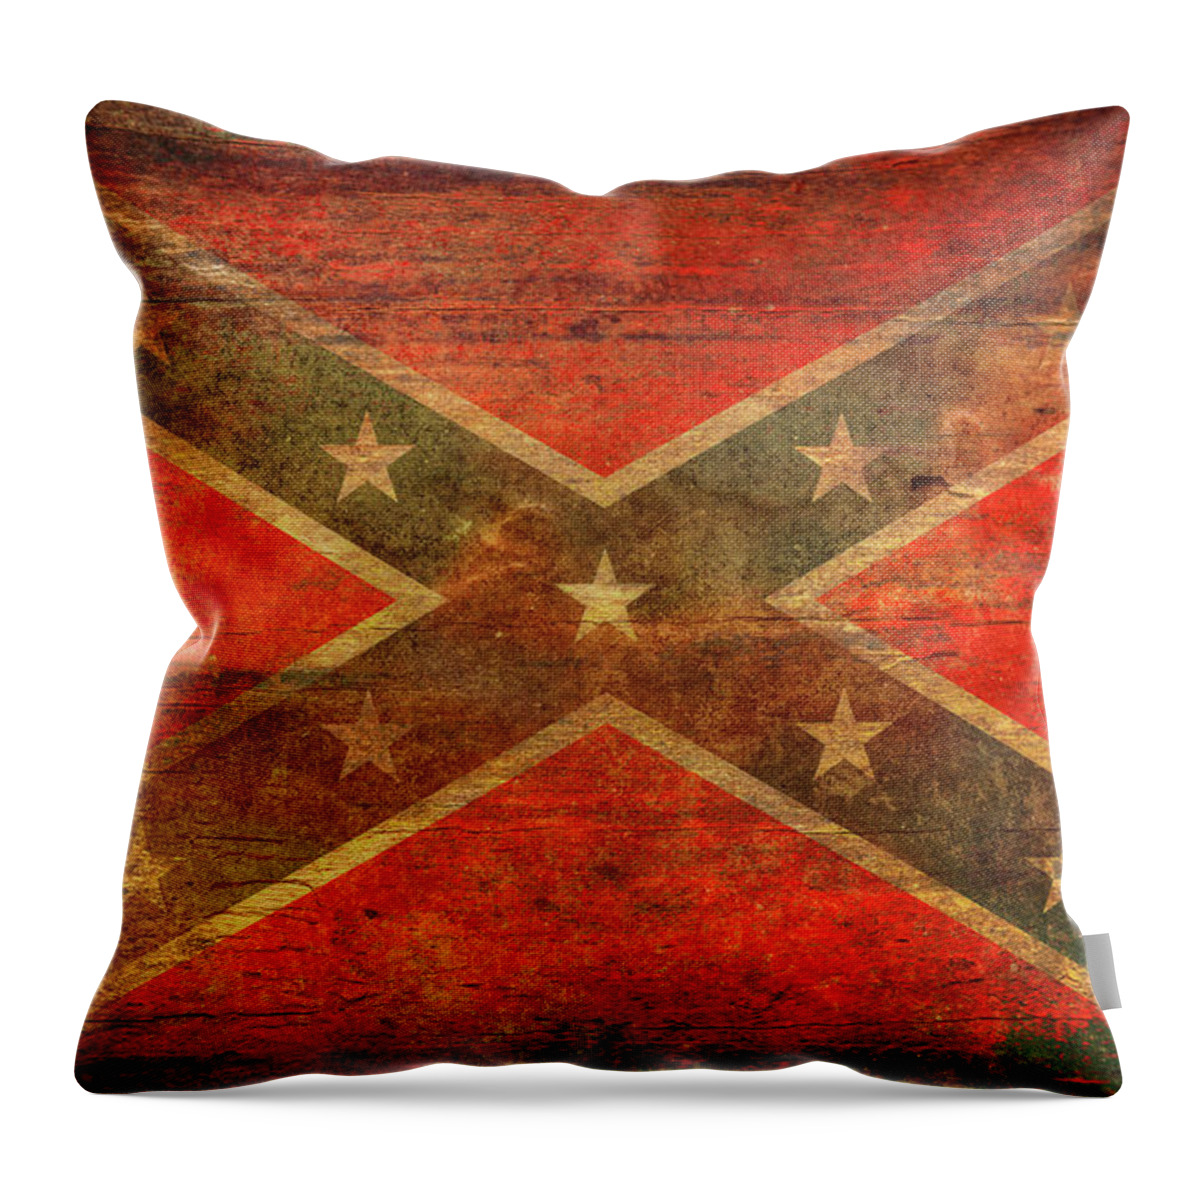 Rebel Confederate Flag On Wood Throw Pillow featuring the digital art Rebel Confederate Flag on Wood by Randy Steele